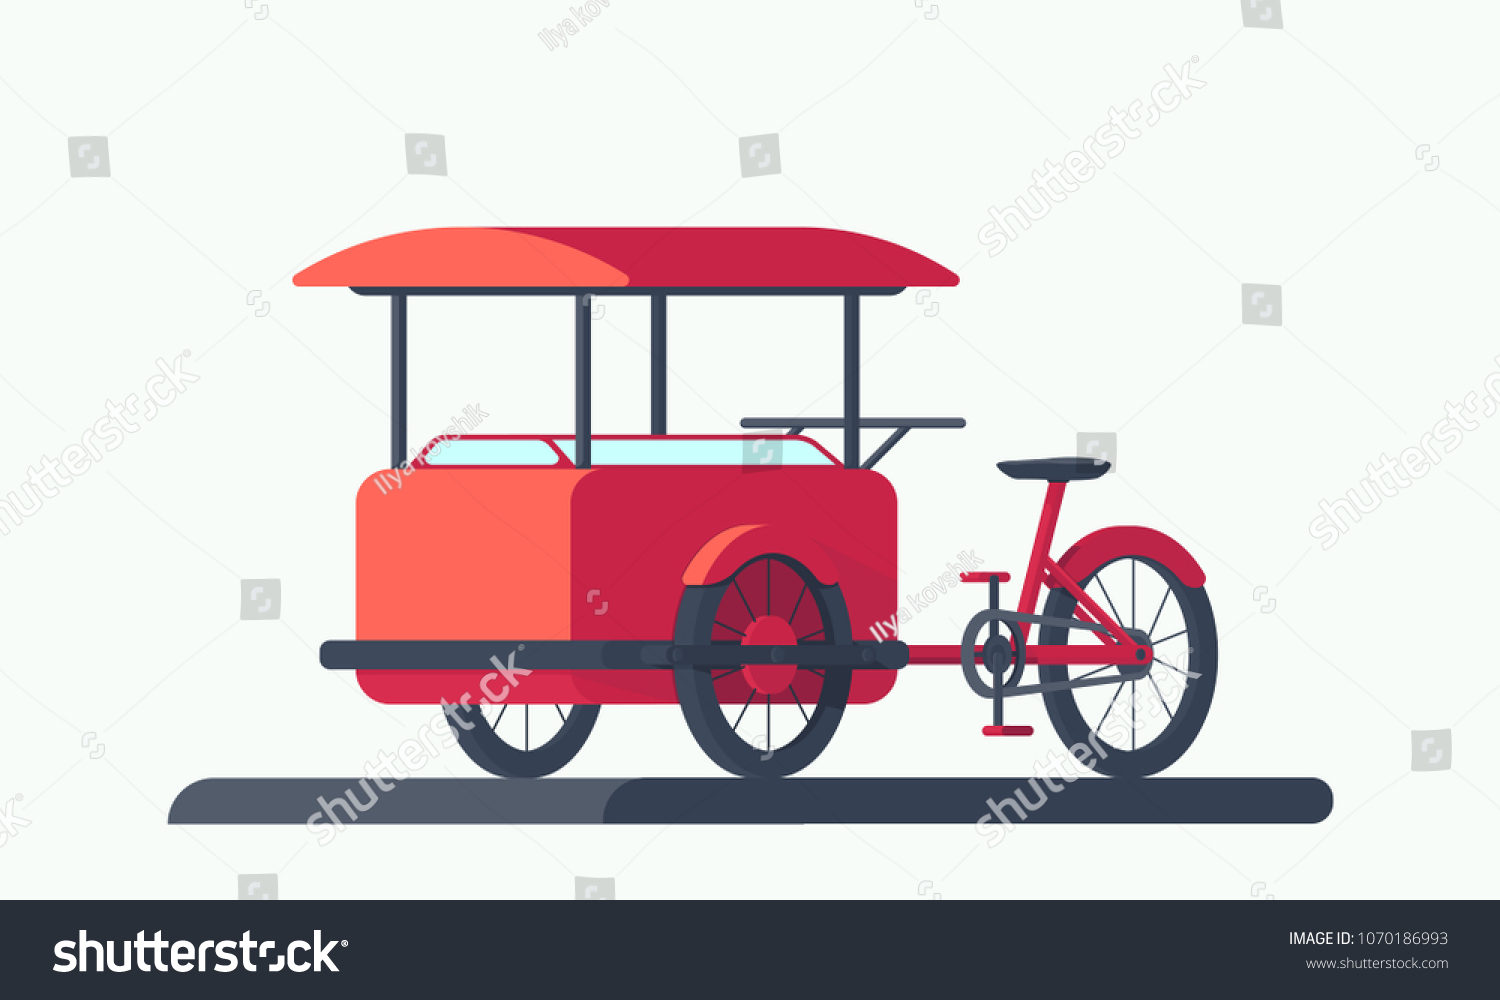 SVG of Red bicycle cart. Mobile shop for various fast food and ice cream. Vector illustration isolated on white background. svg